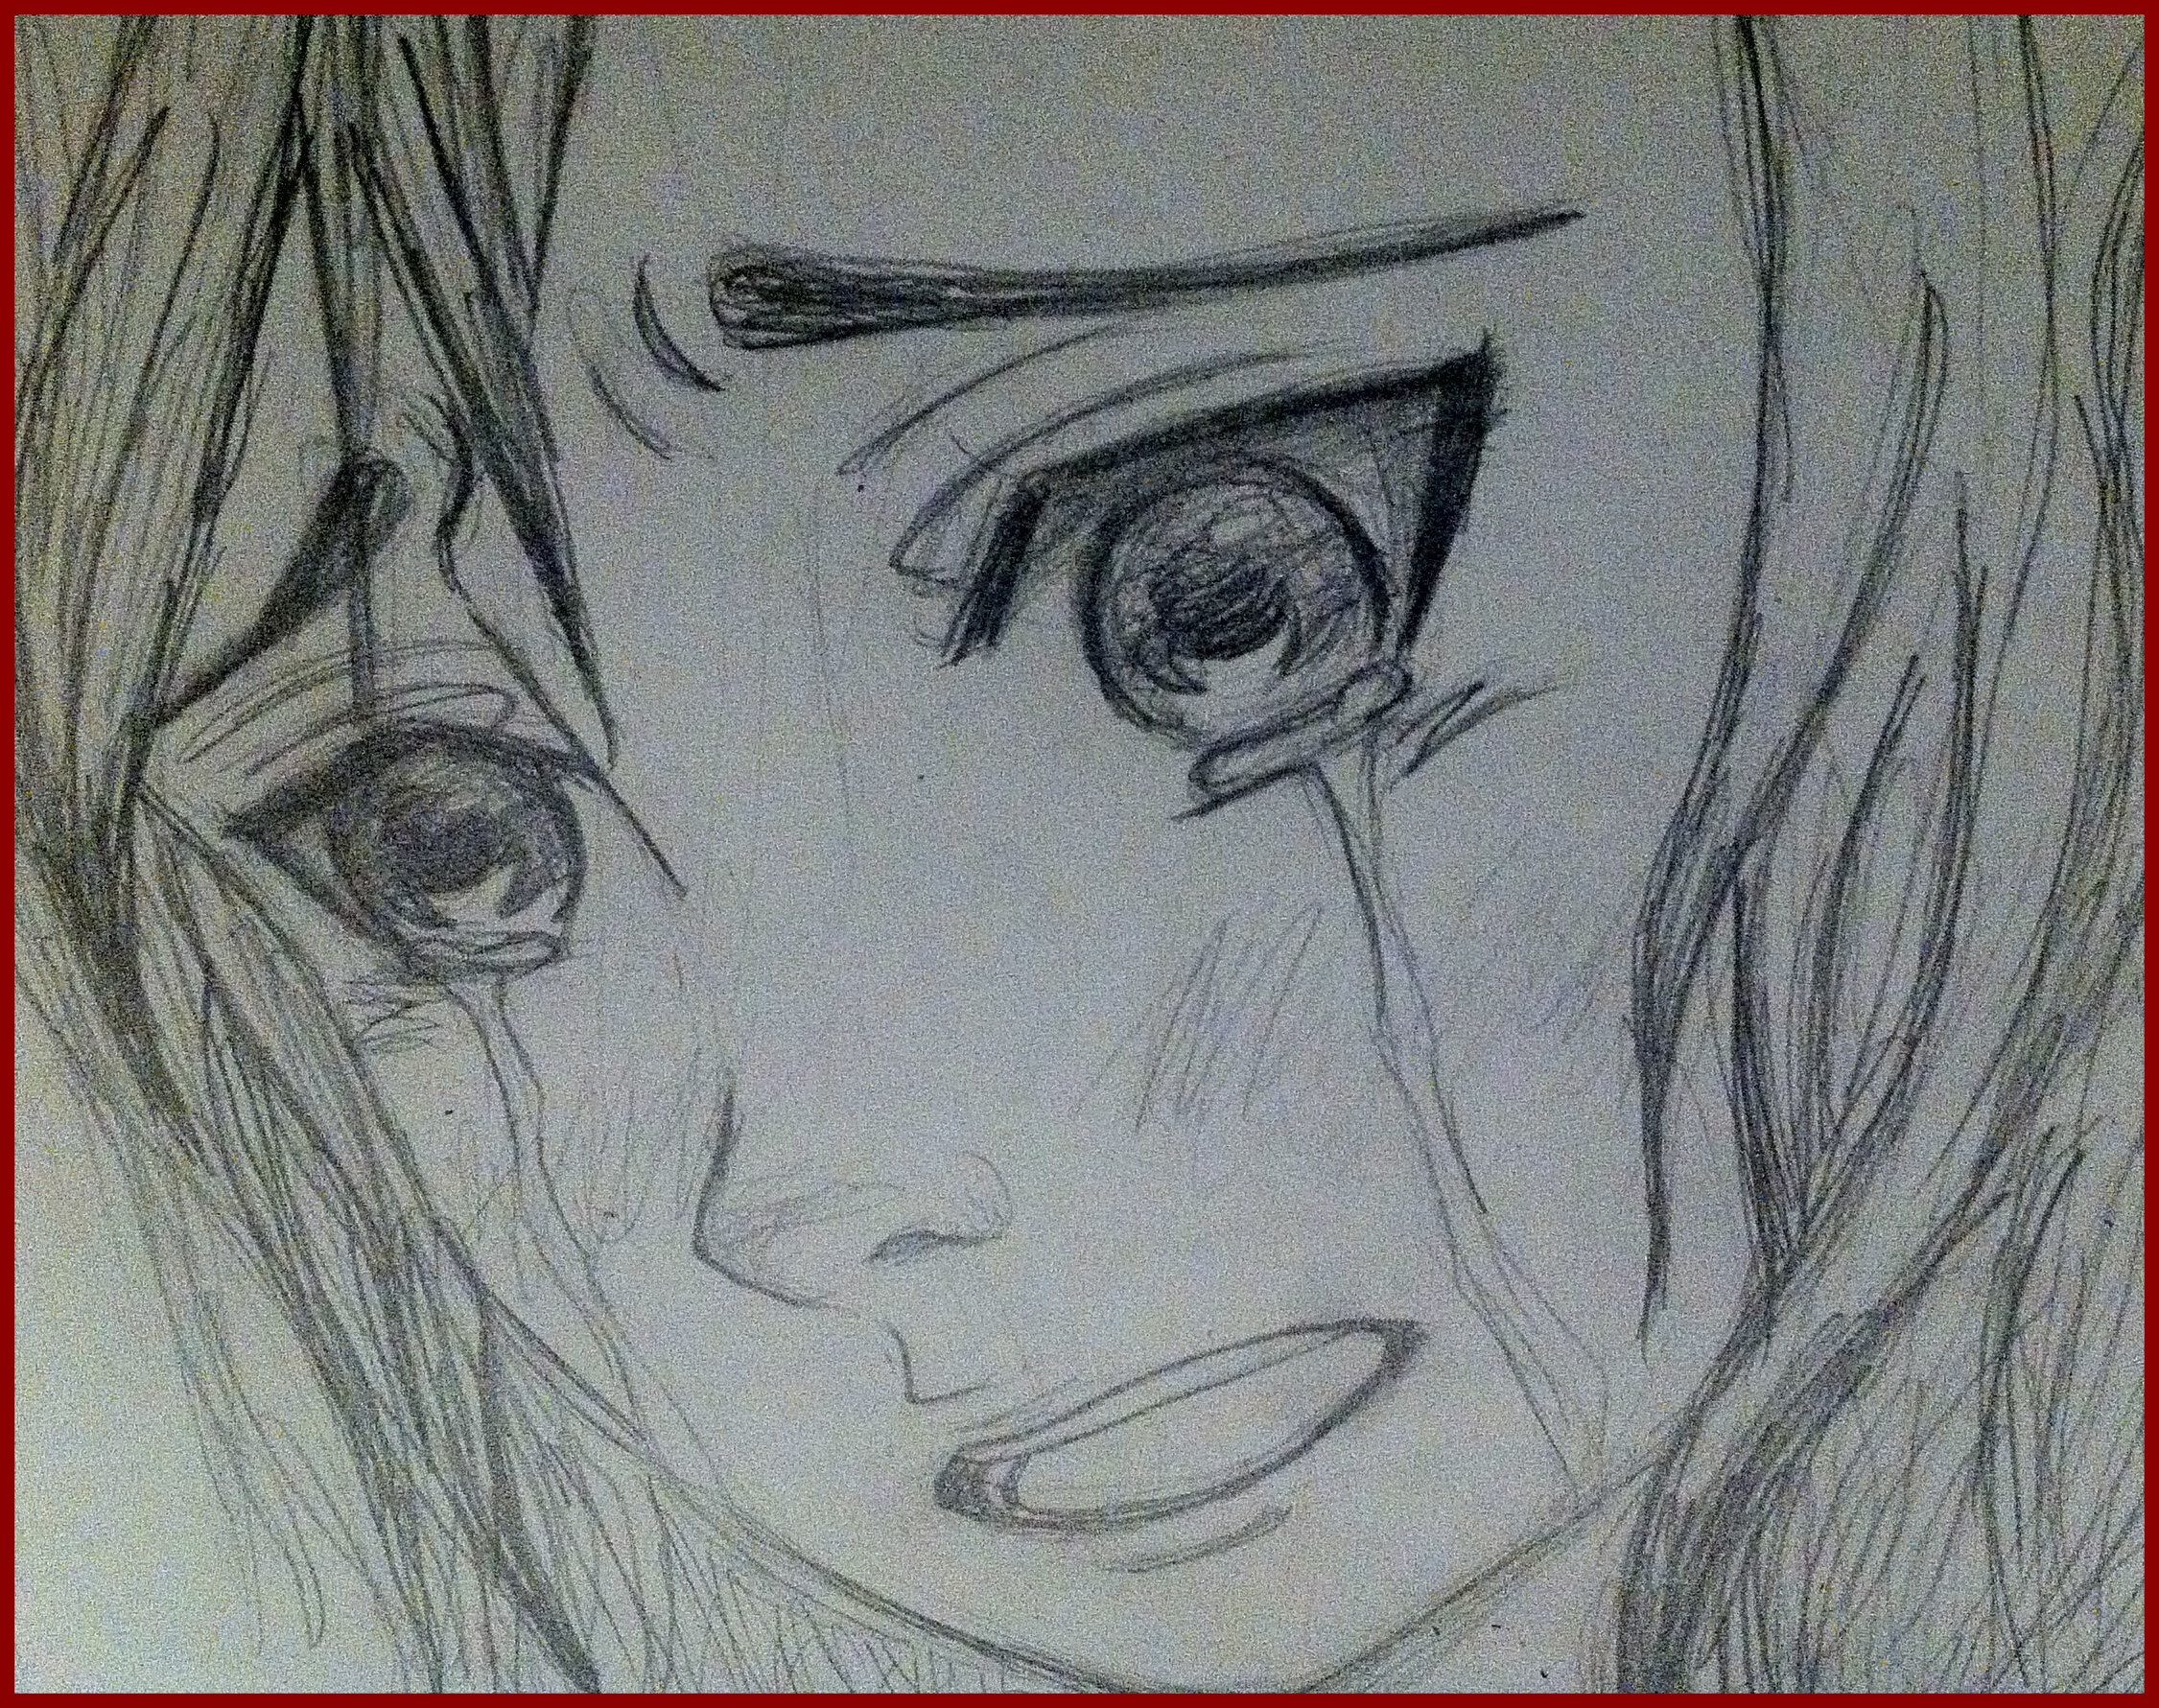  Crying  Sketch at PaintingValley com Explore collection 